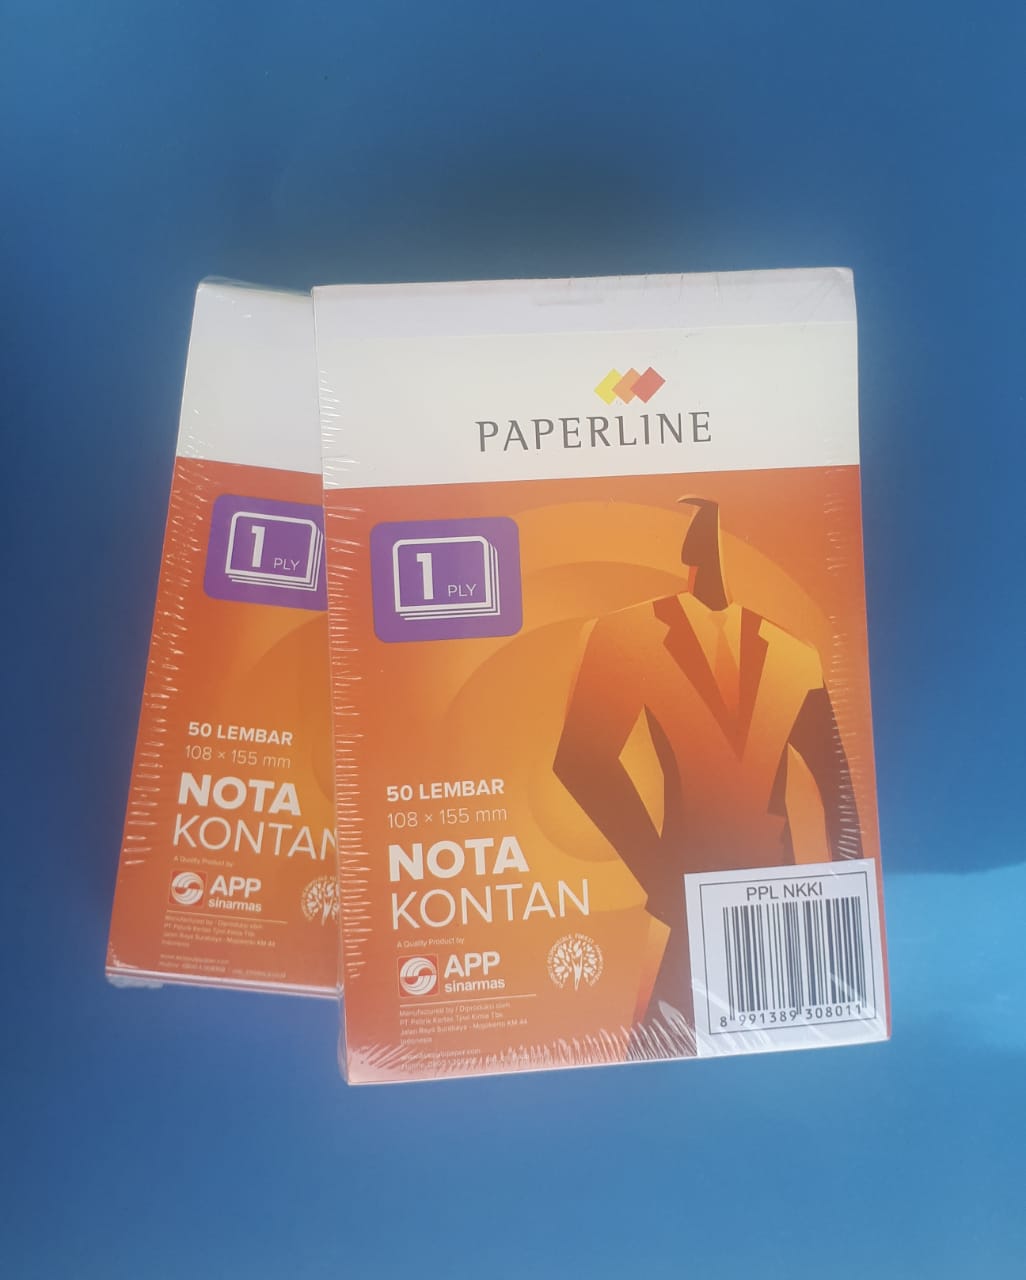 NOTA PAPERLINE 1 PLY KECIL